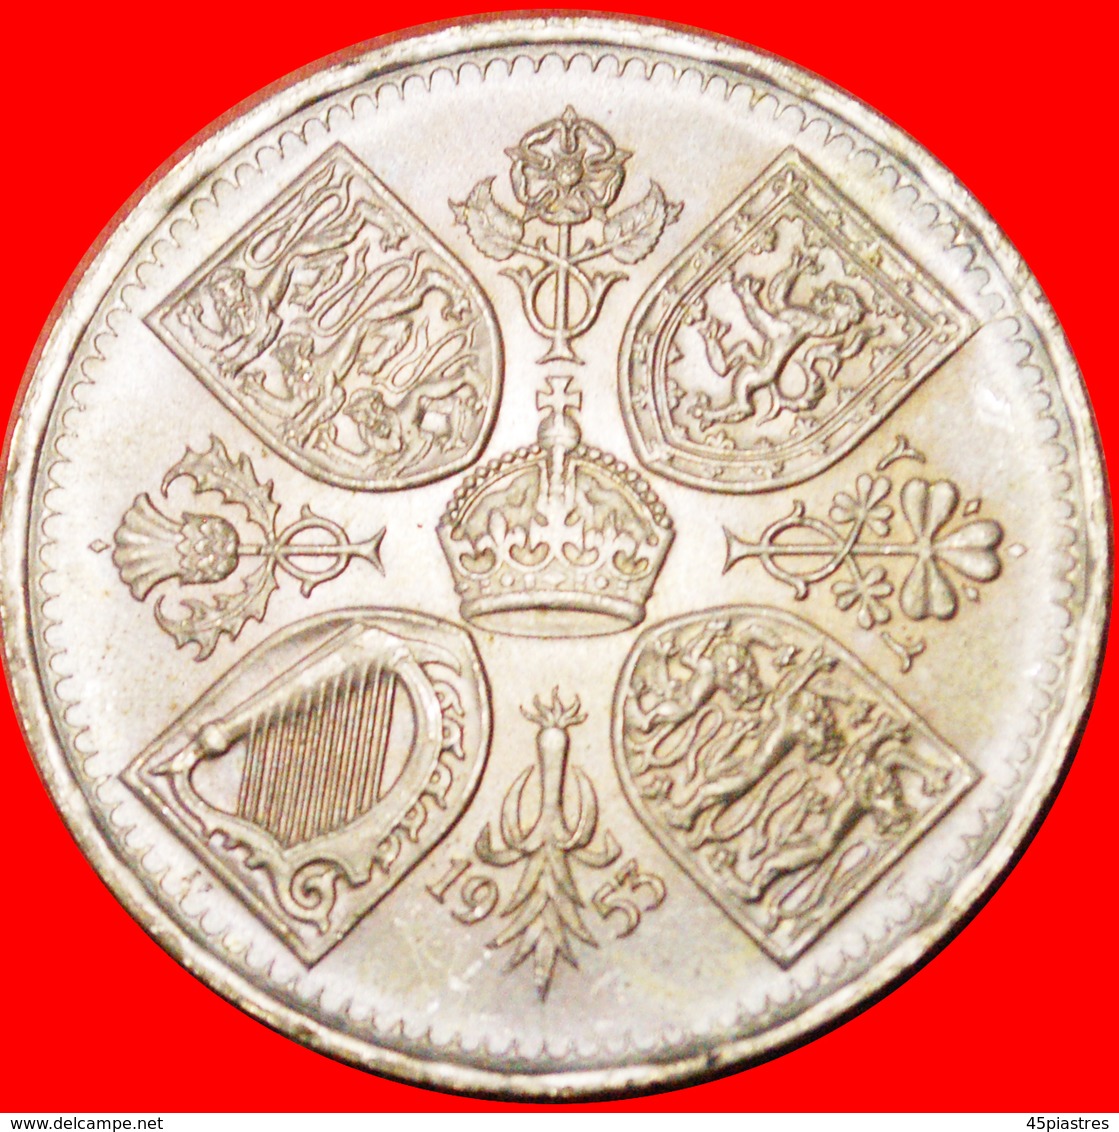 # CORONATION CROWN: GREAT BRITAIN ★ 5 SHILLINGS 1953 FIRST CROWN OF ELIZABETH II UNC MINT LUSTER★LOW START ★ NO RESERVE! - Maundy Sets & Commémoratives